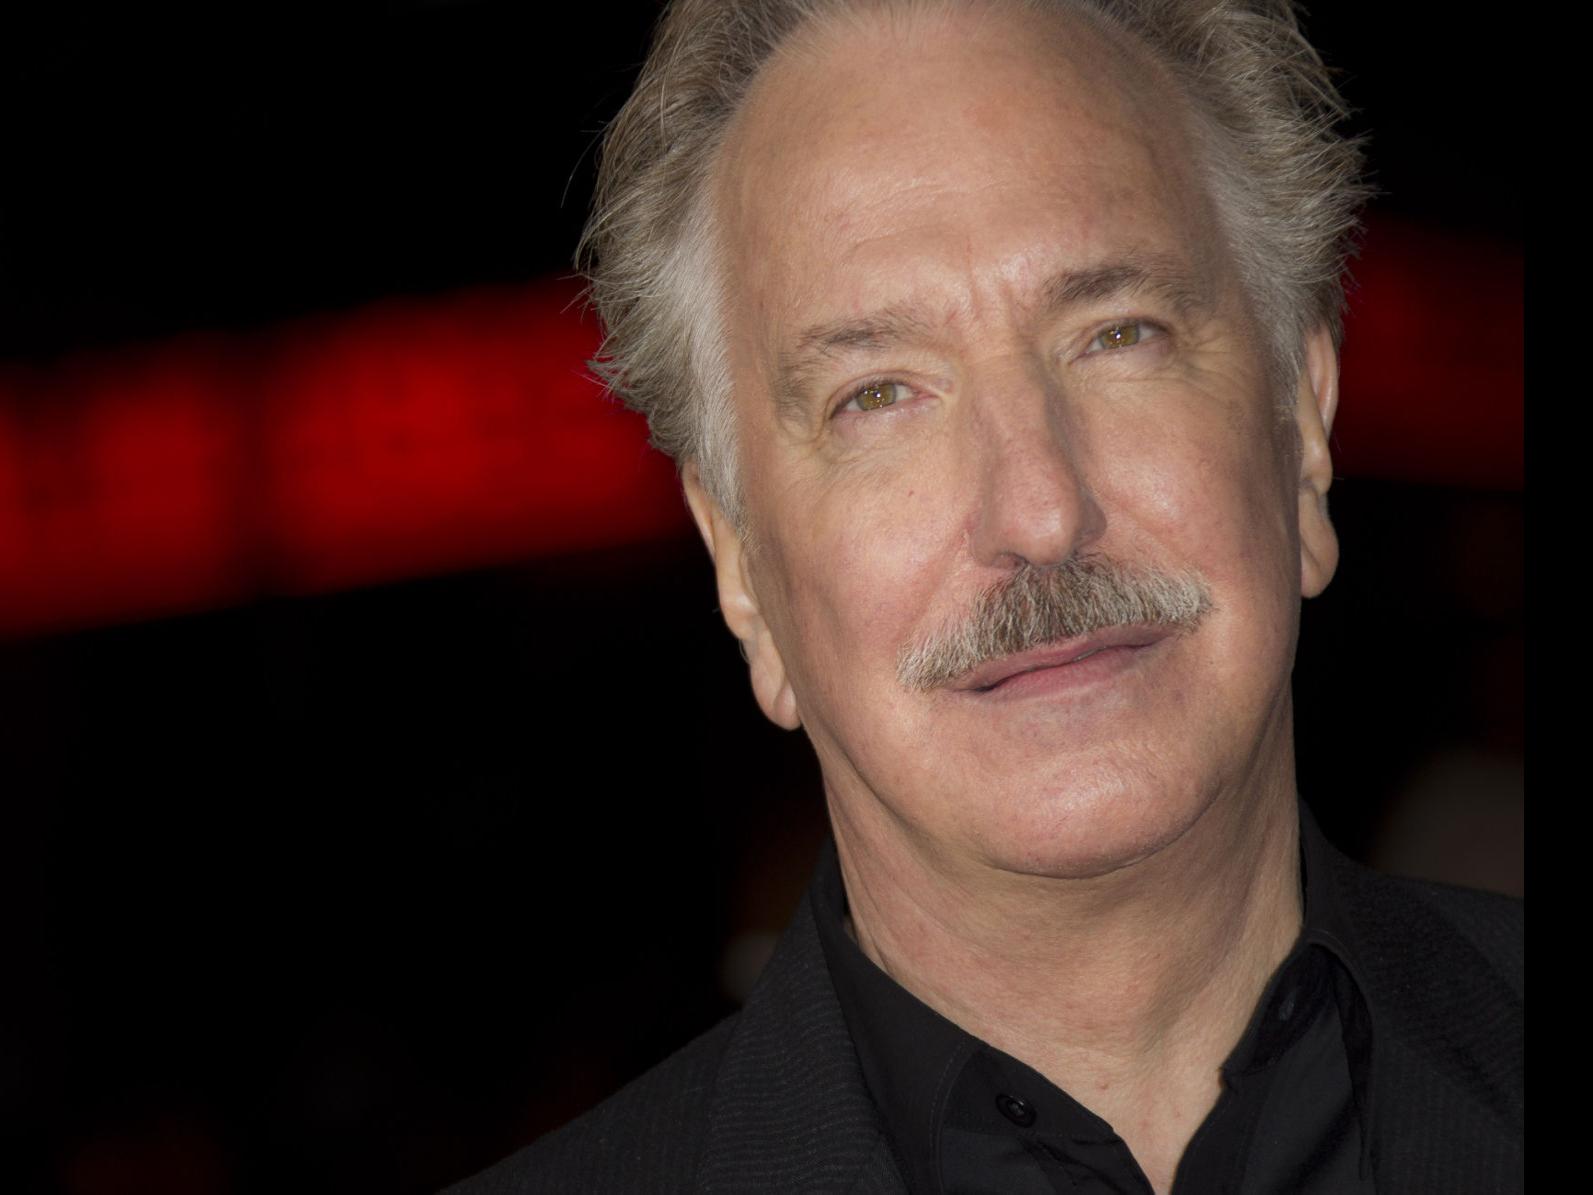 Alan Rickman remembered for his roles in Sense and Sensibility and Truly  Madly Deeply.